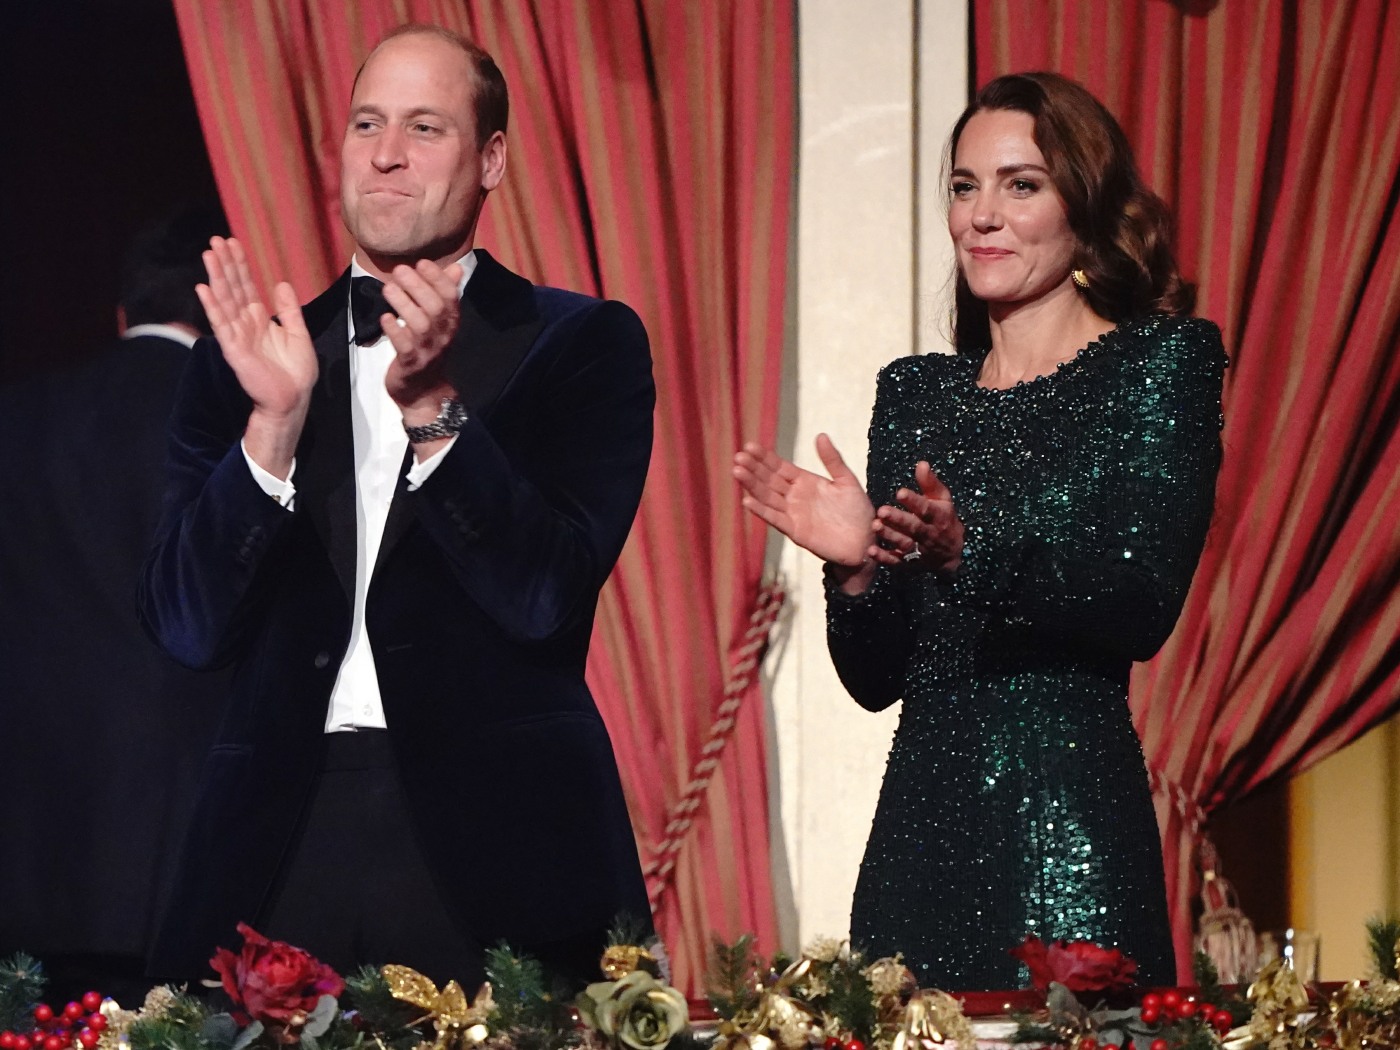 The Duke and the Duchess of Cambridge Attend the Royal Variety Performance